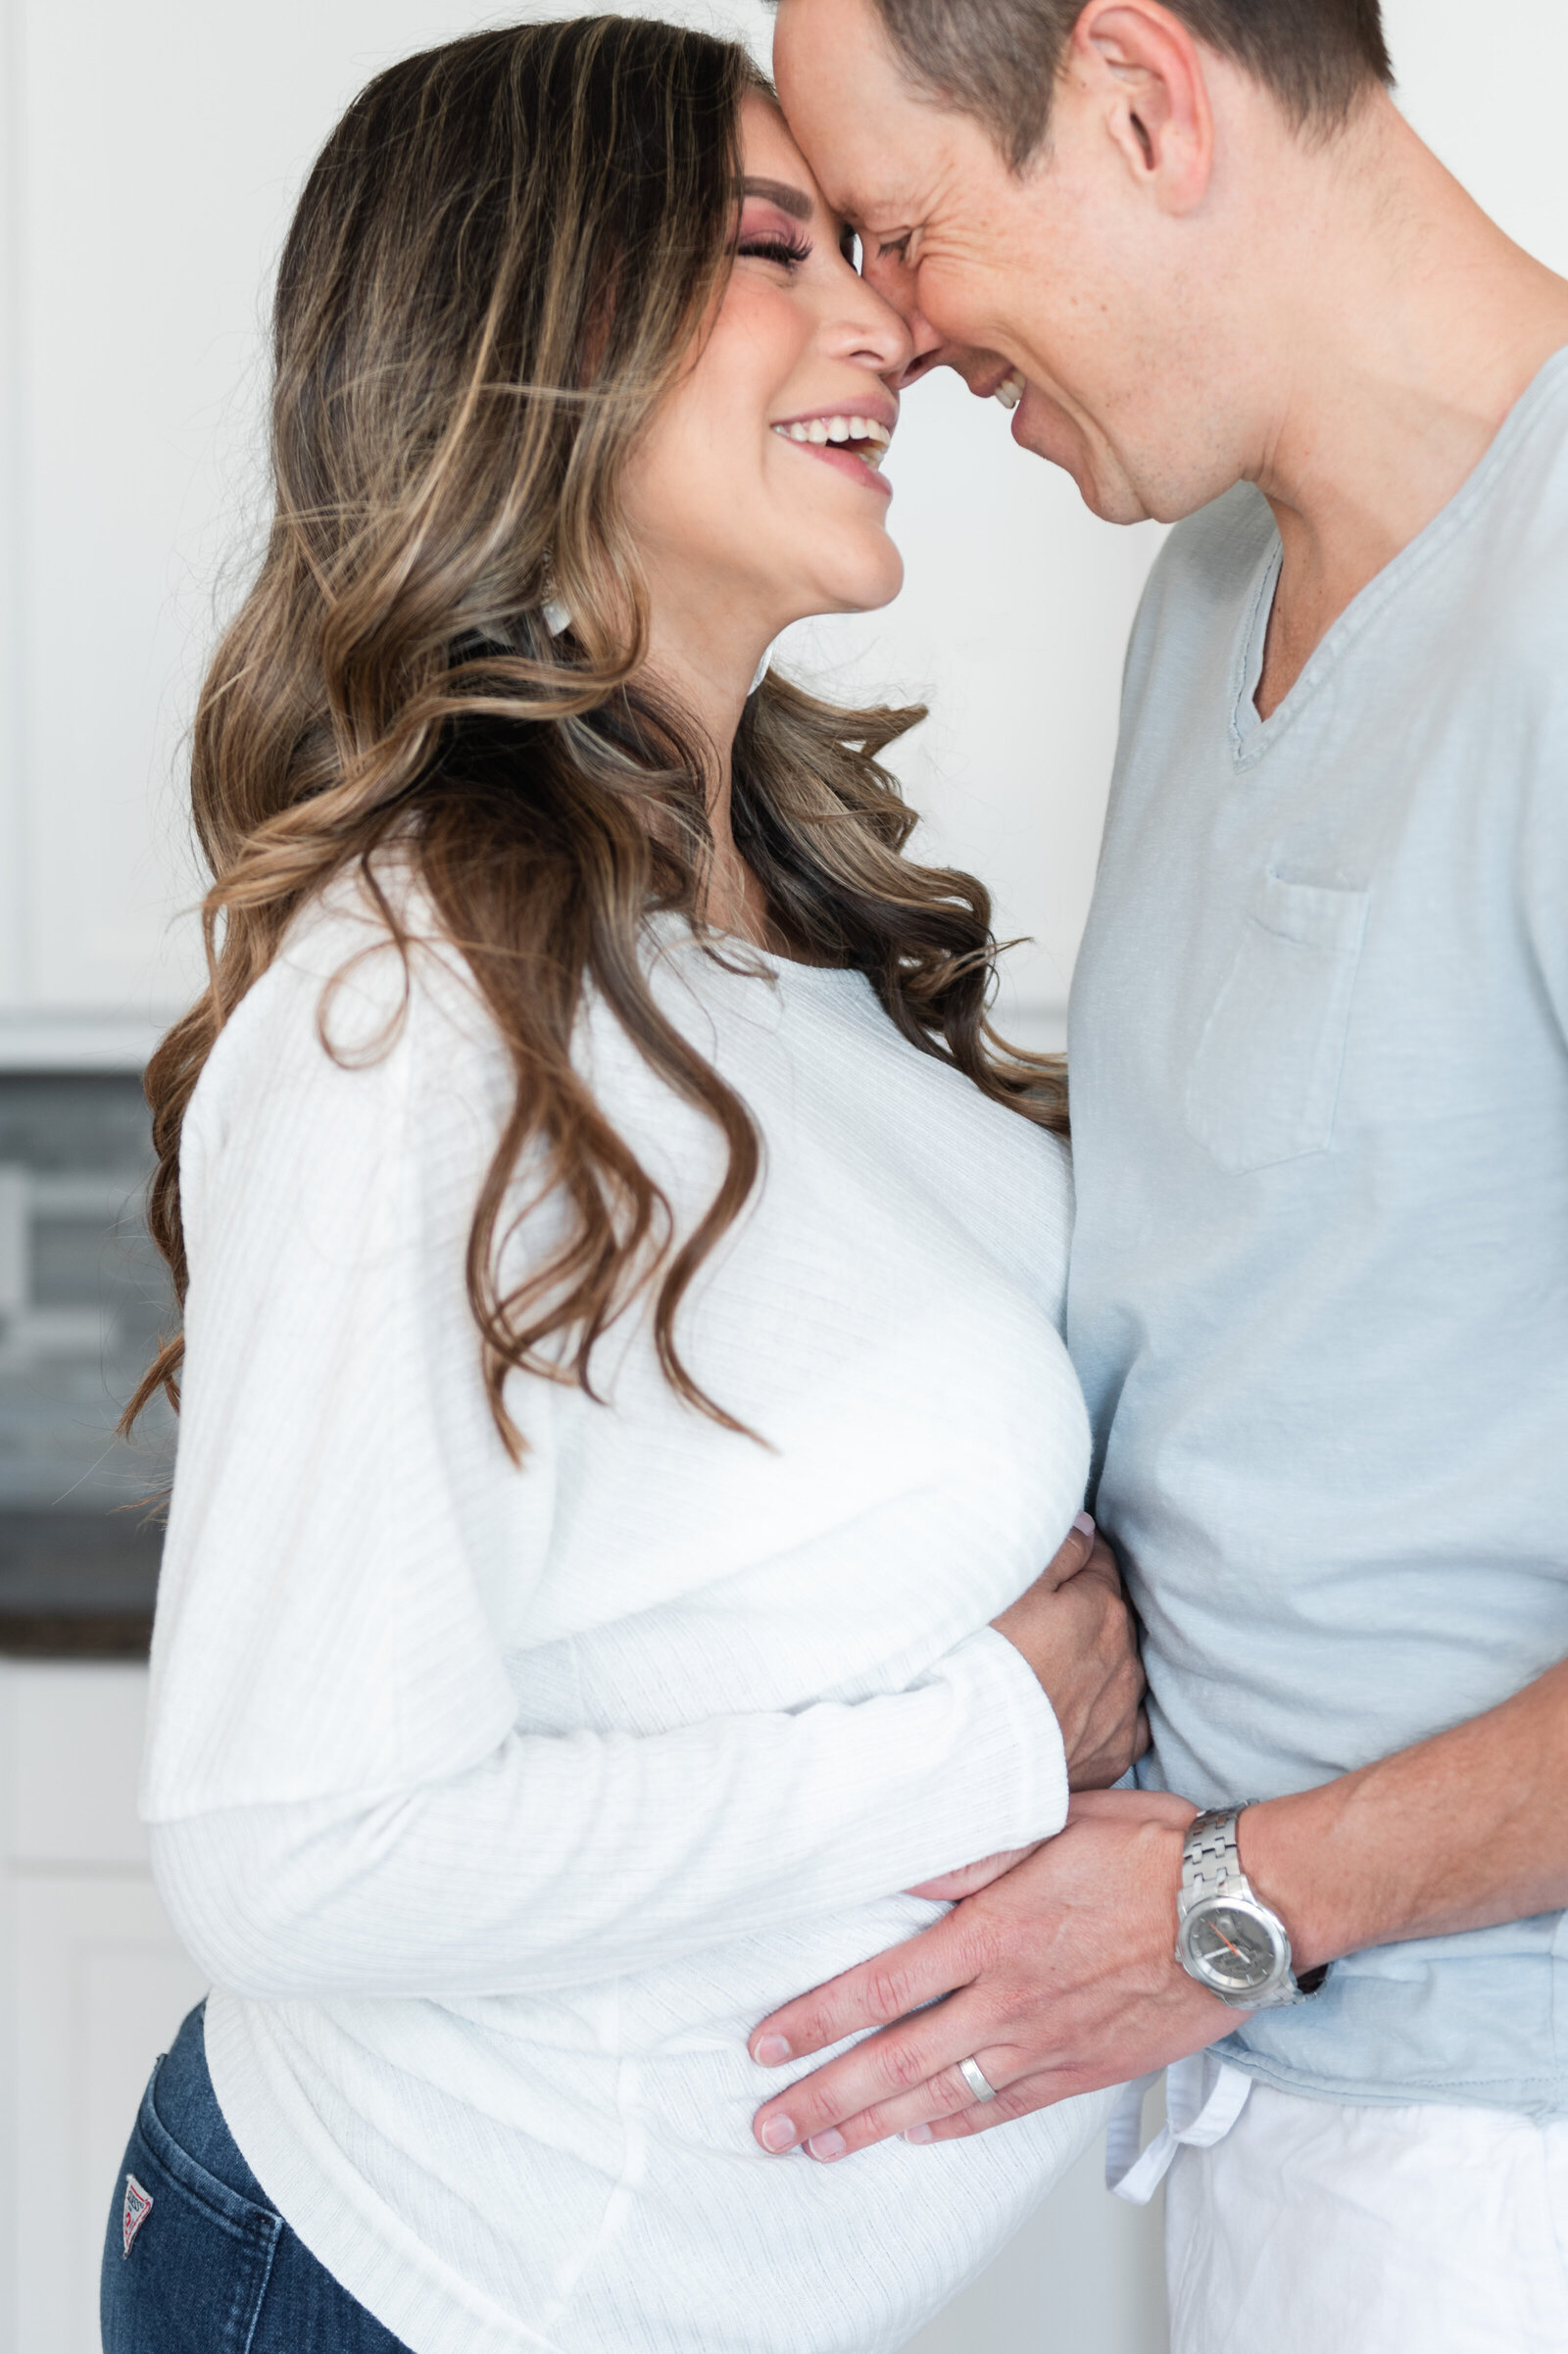 expecting mom and dad in home kitchen maternity session by miami lifestyle photographers David and Meivys MSP Photography